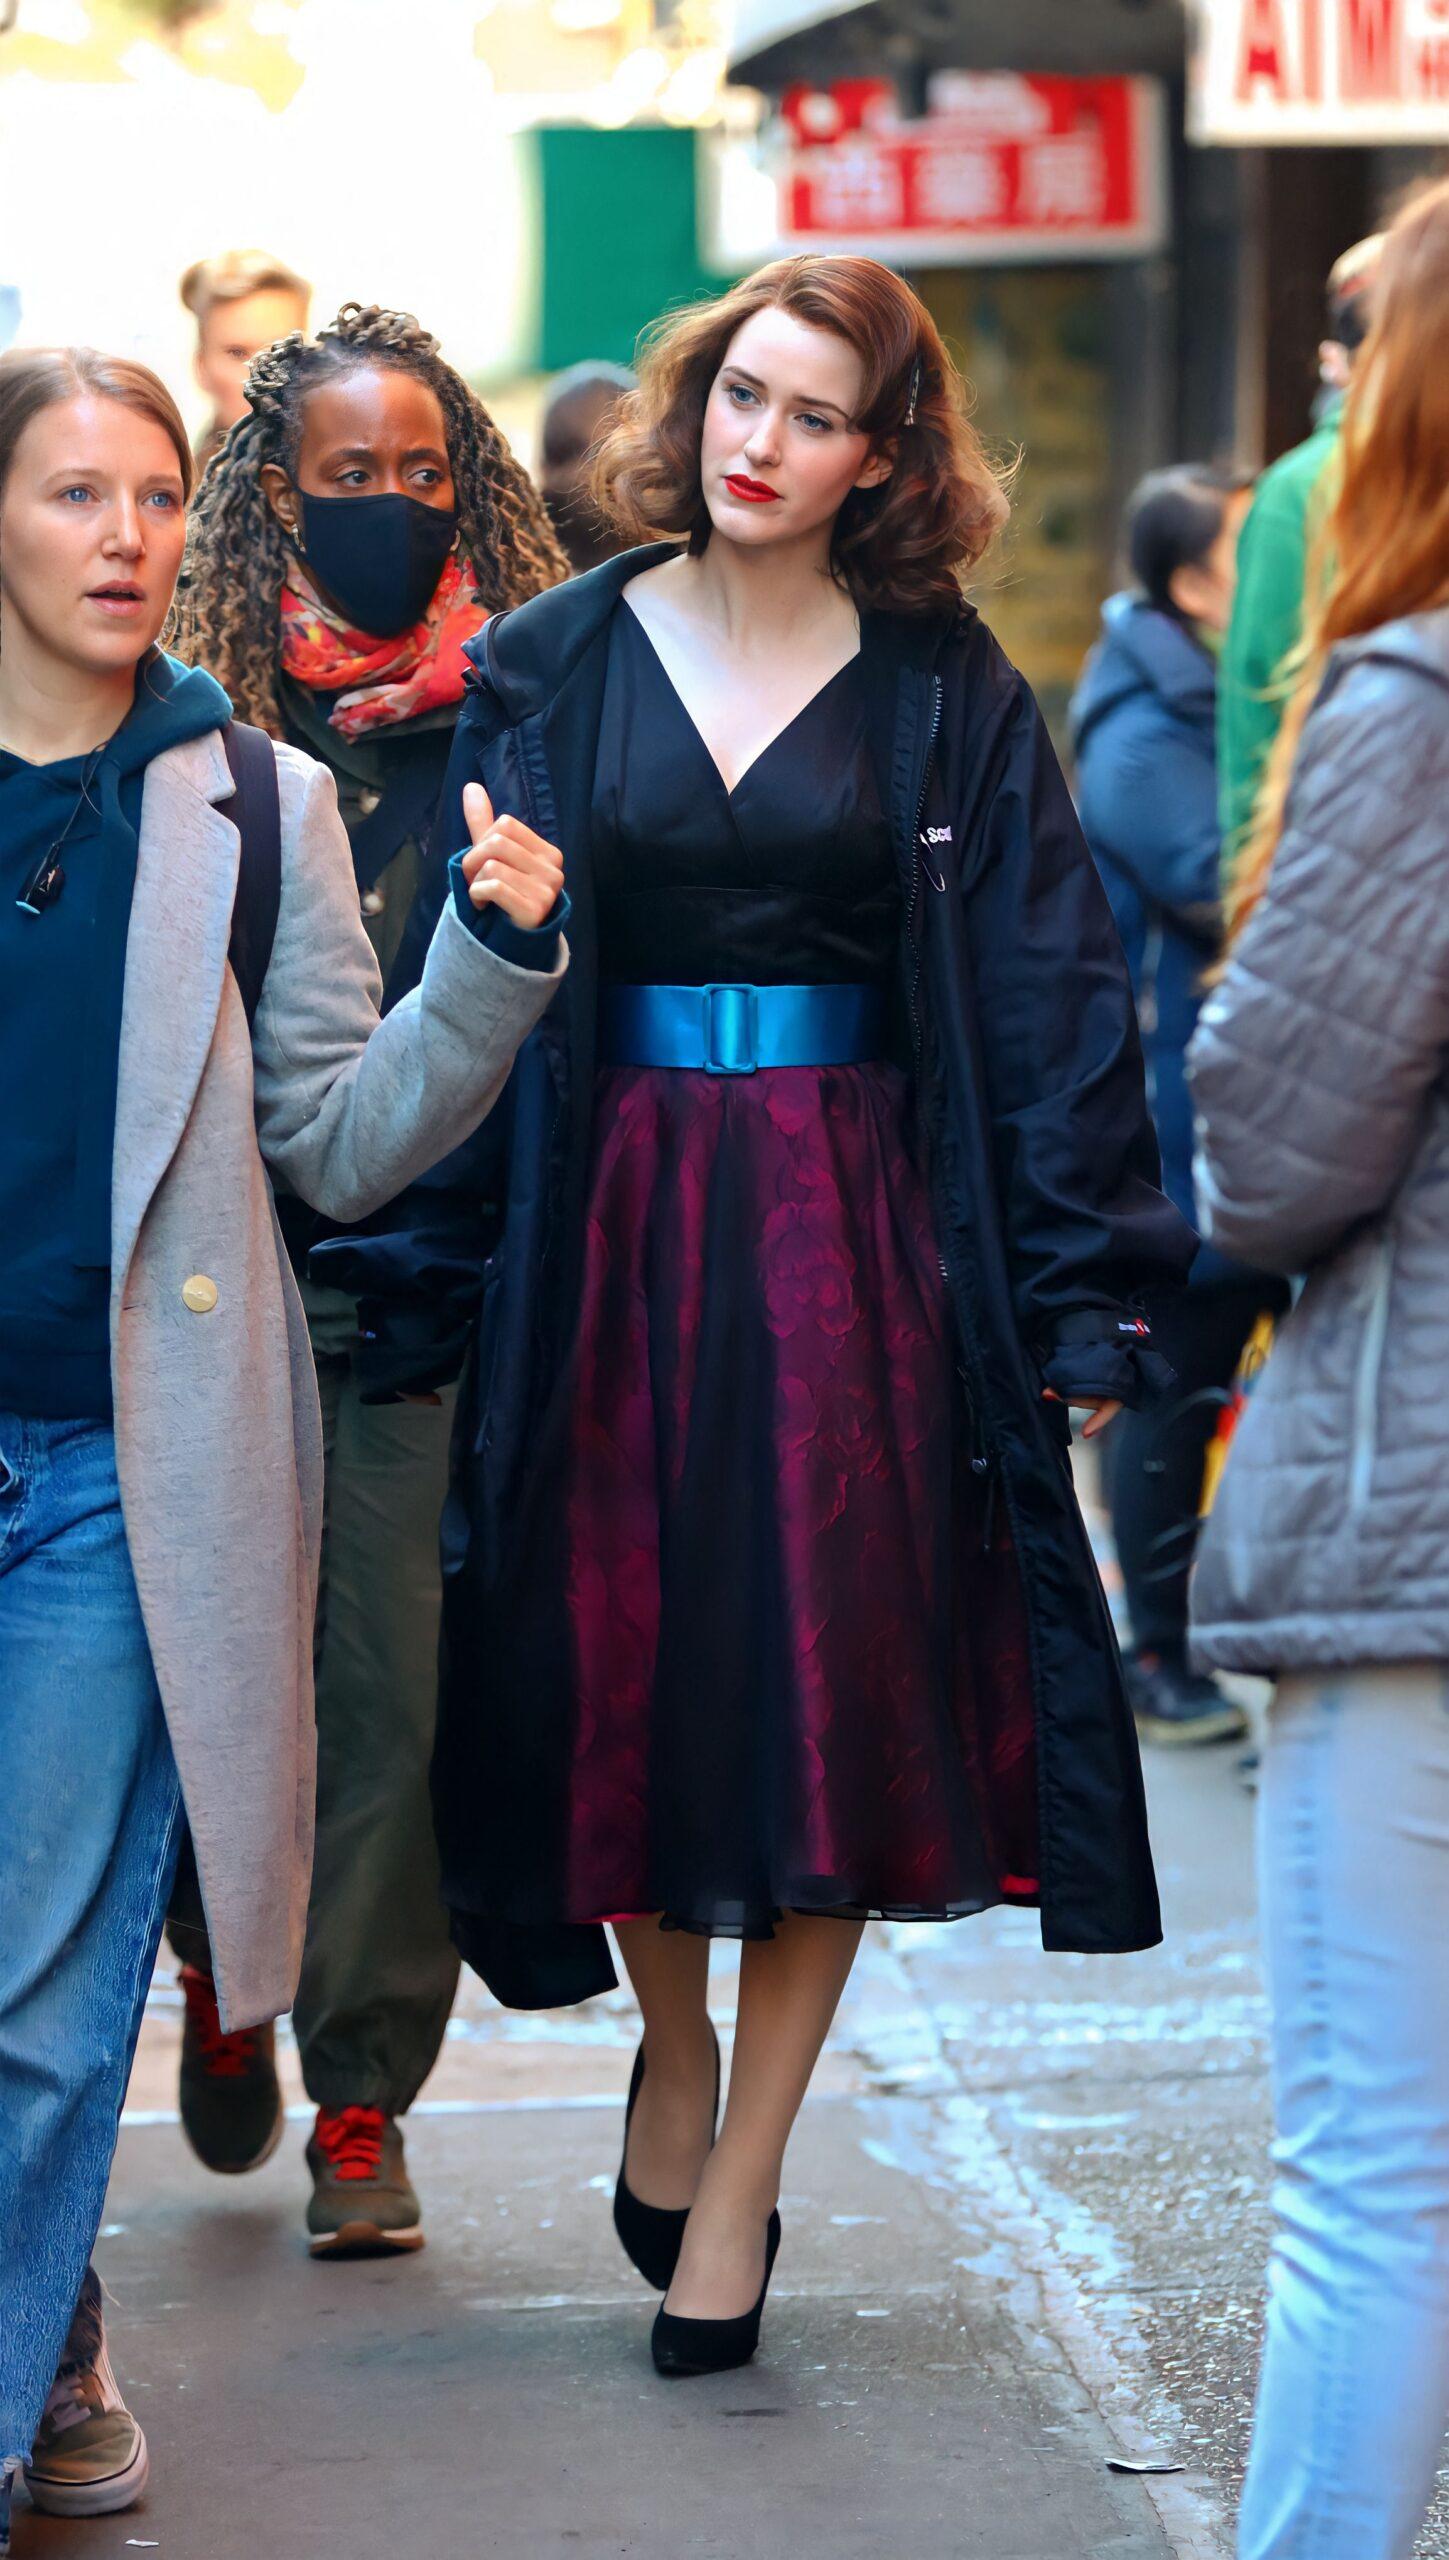 Rachel Brosnahan seen on the set of The Marvelous Mrs Maisel in Chinatown.